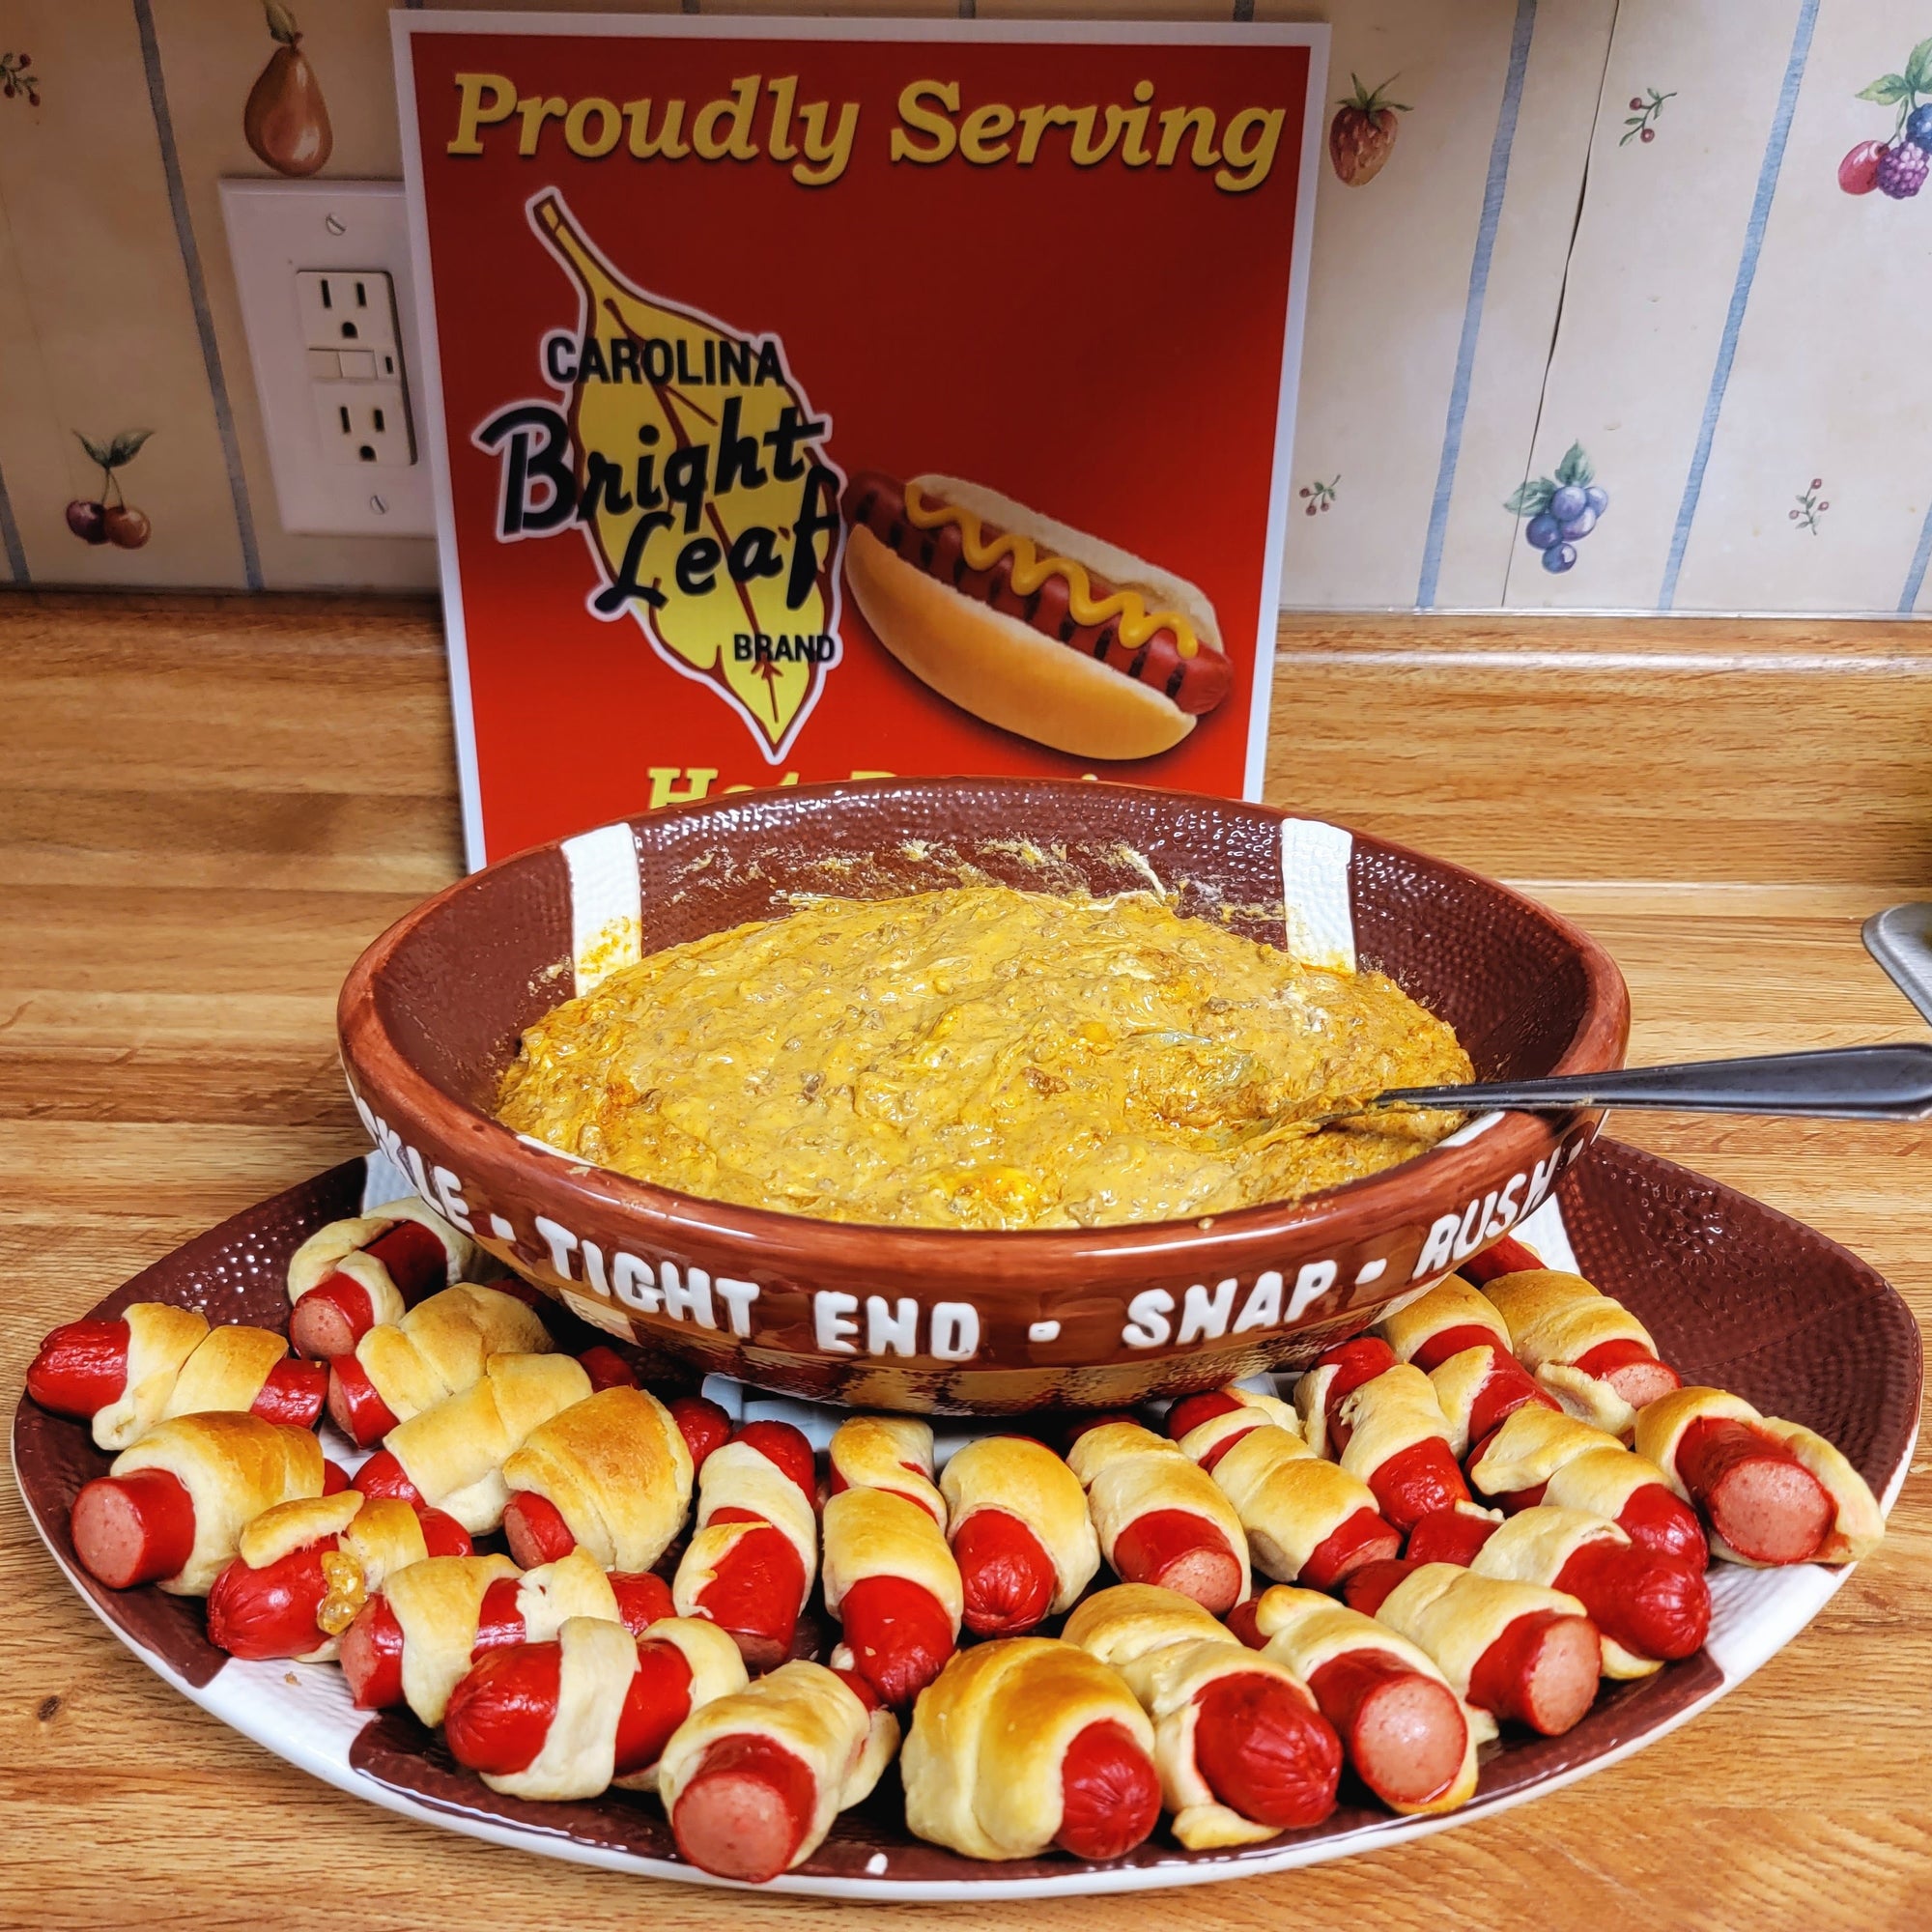 Chili Cheese Spiral Dogs